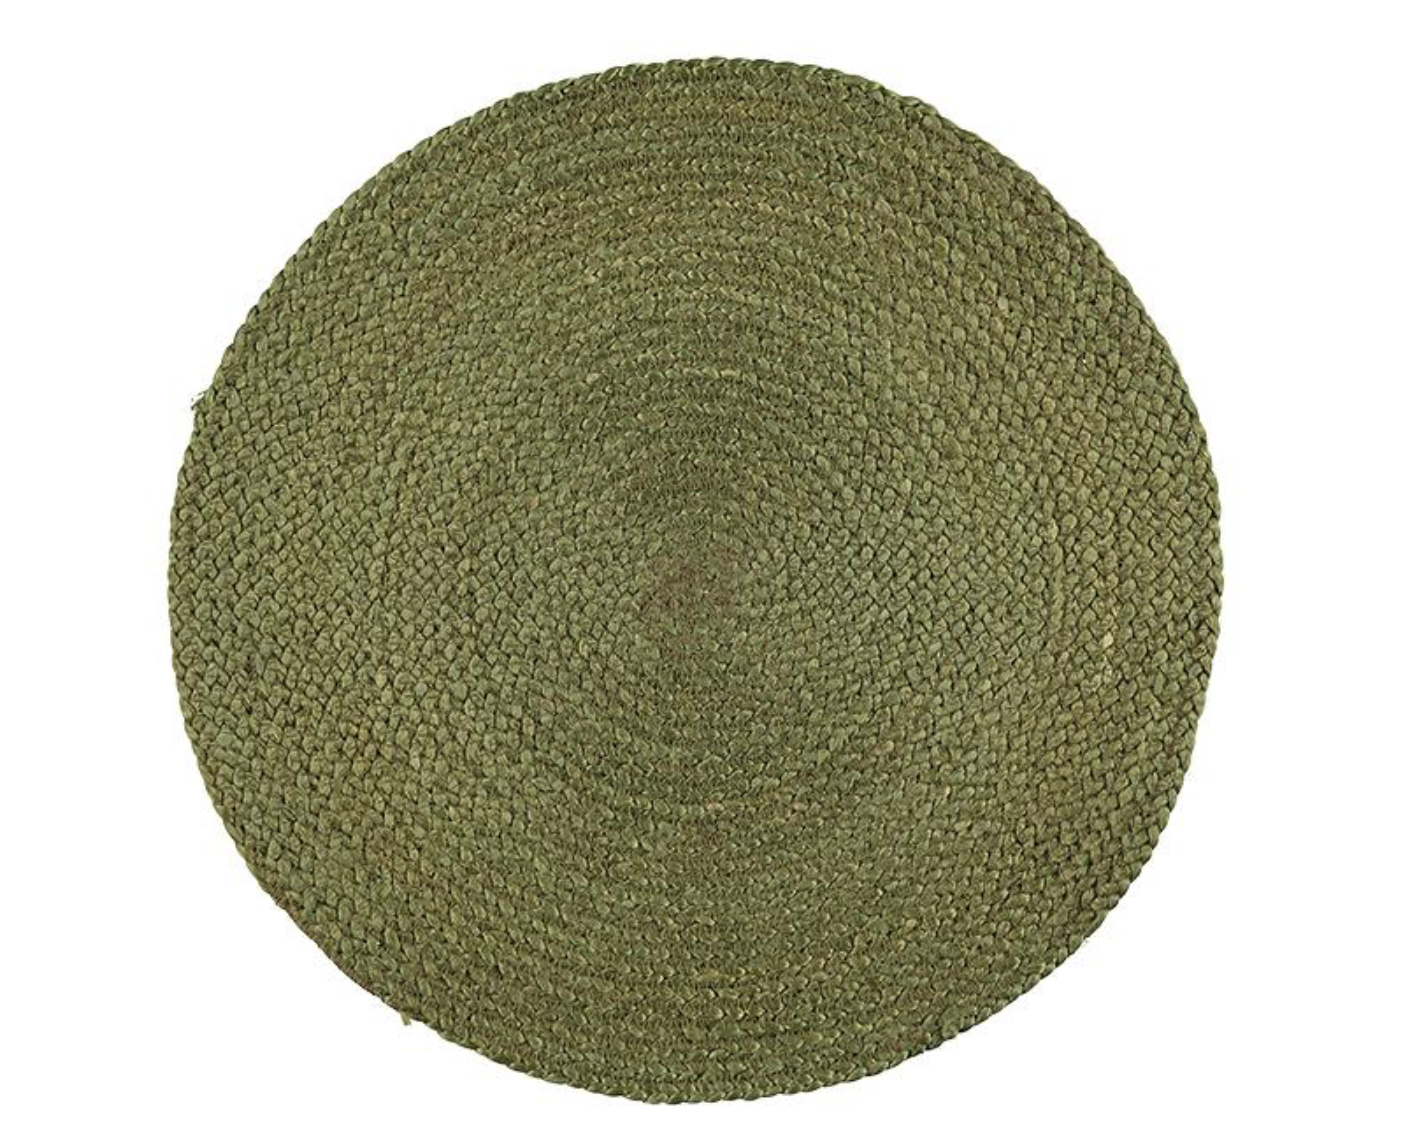 silky jute green round placemats